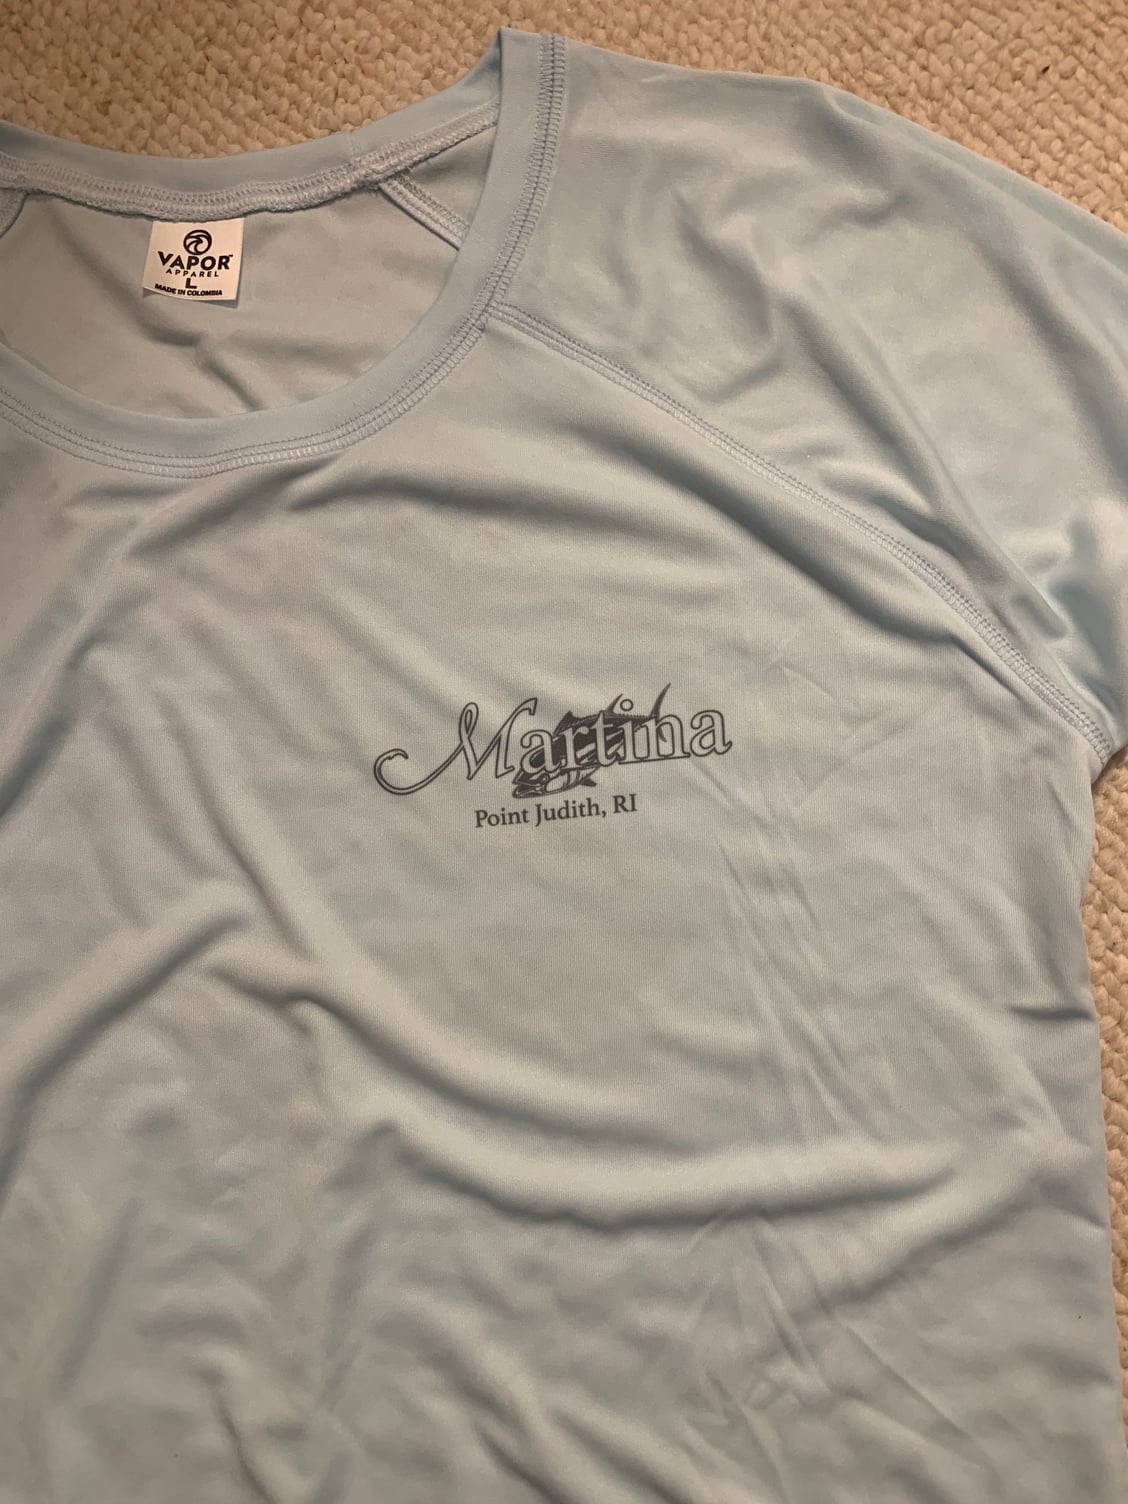 Custom Designed Performance Shirts, T-Shirts and Acc (Full Color